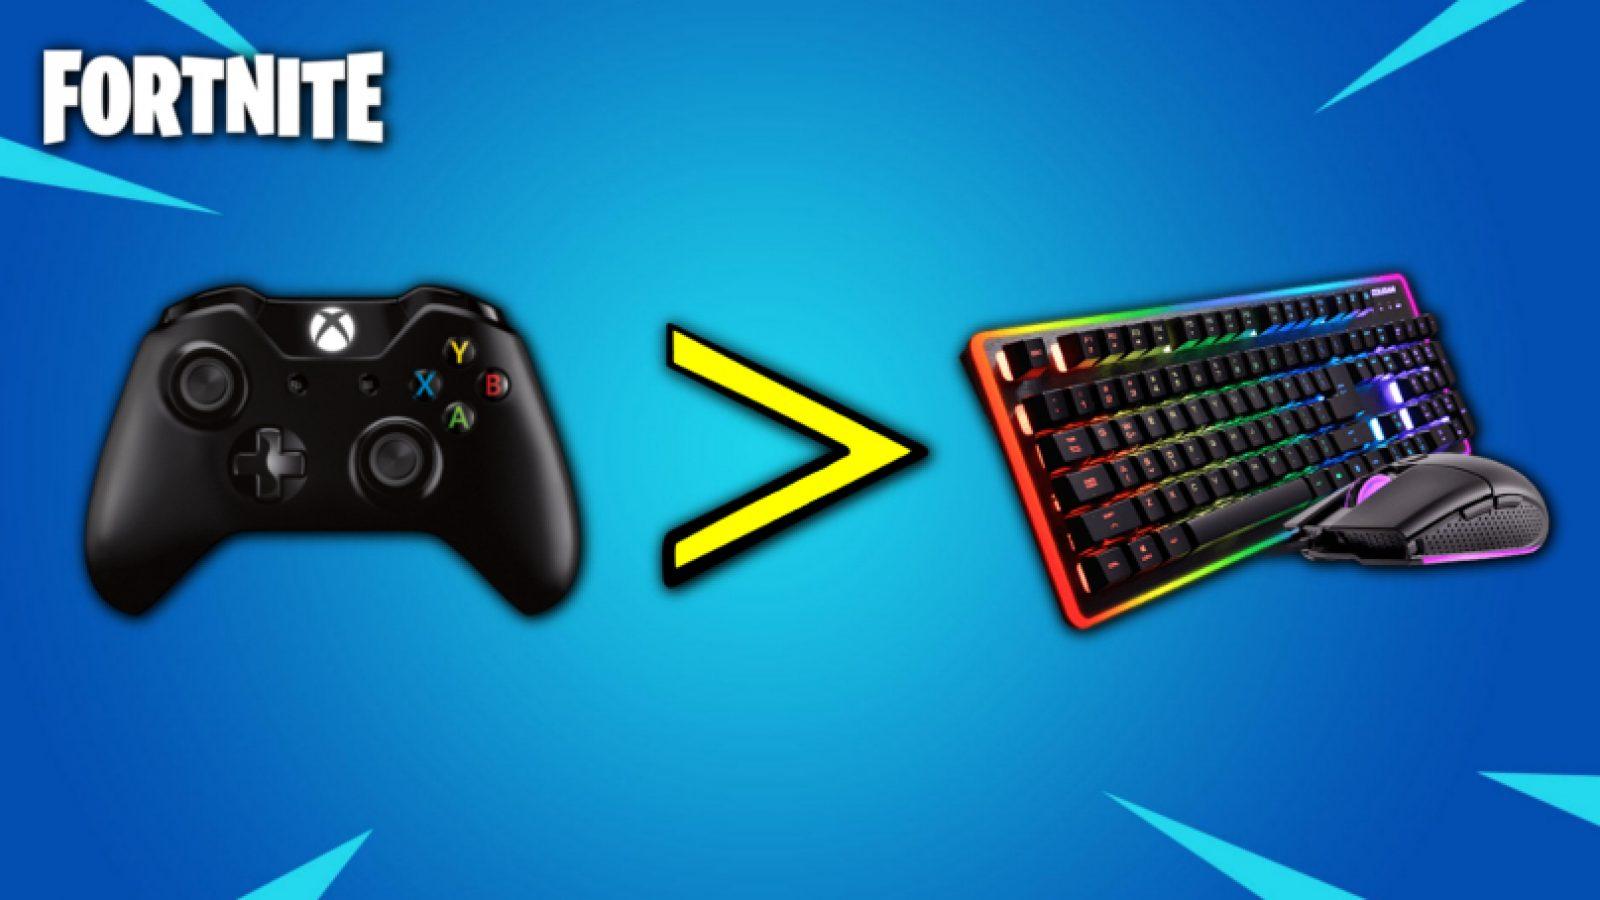 Console players using Keyboard & Mouse will soon be placed in a matchmaking  pool away from Controller players - Fortnite INTEL